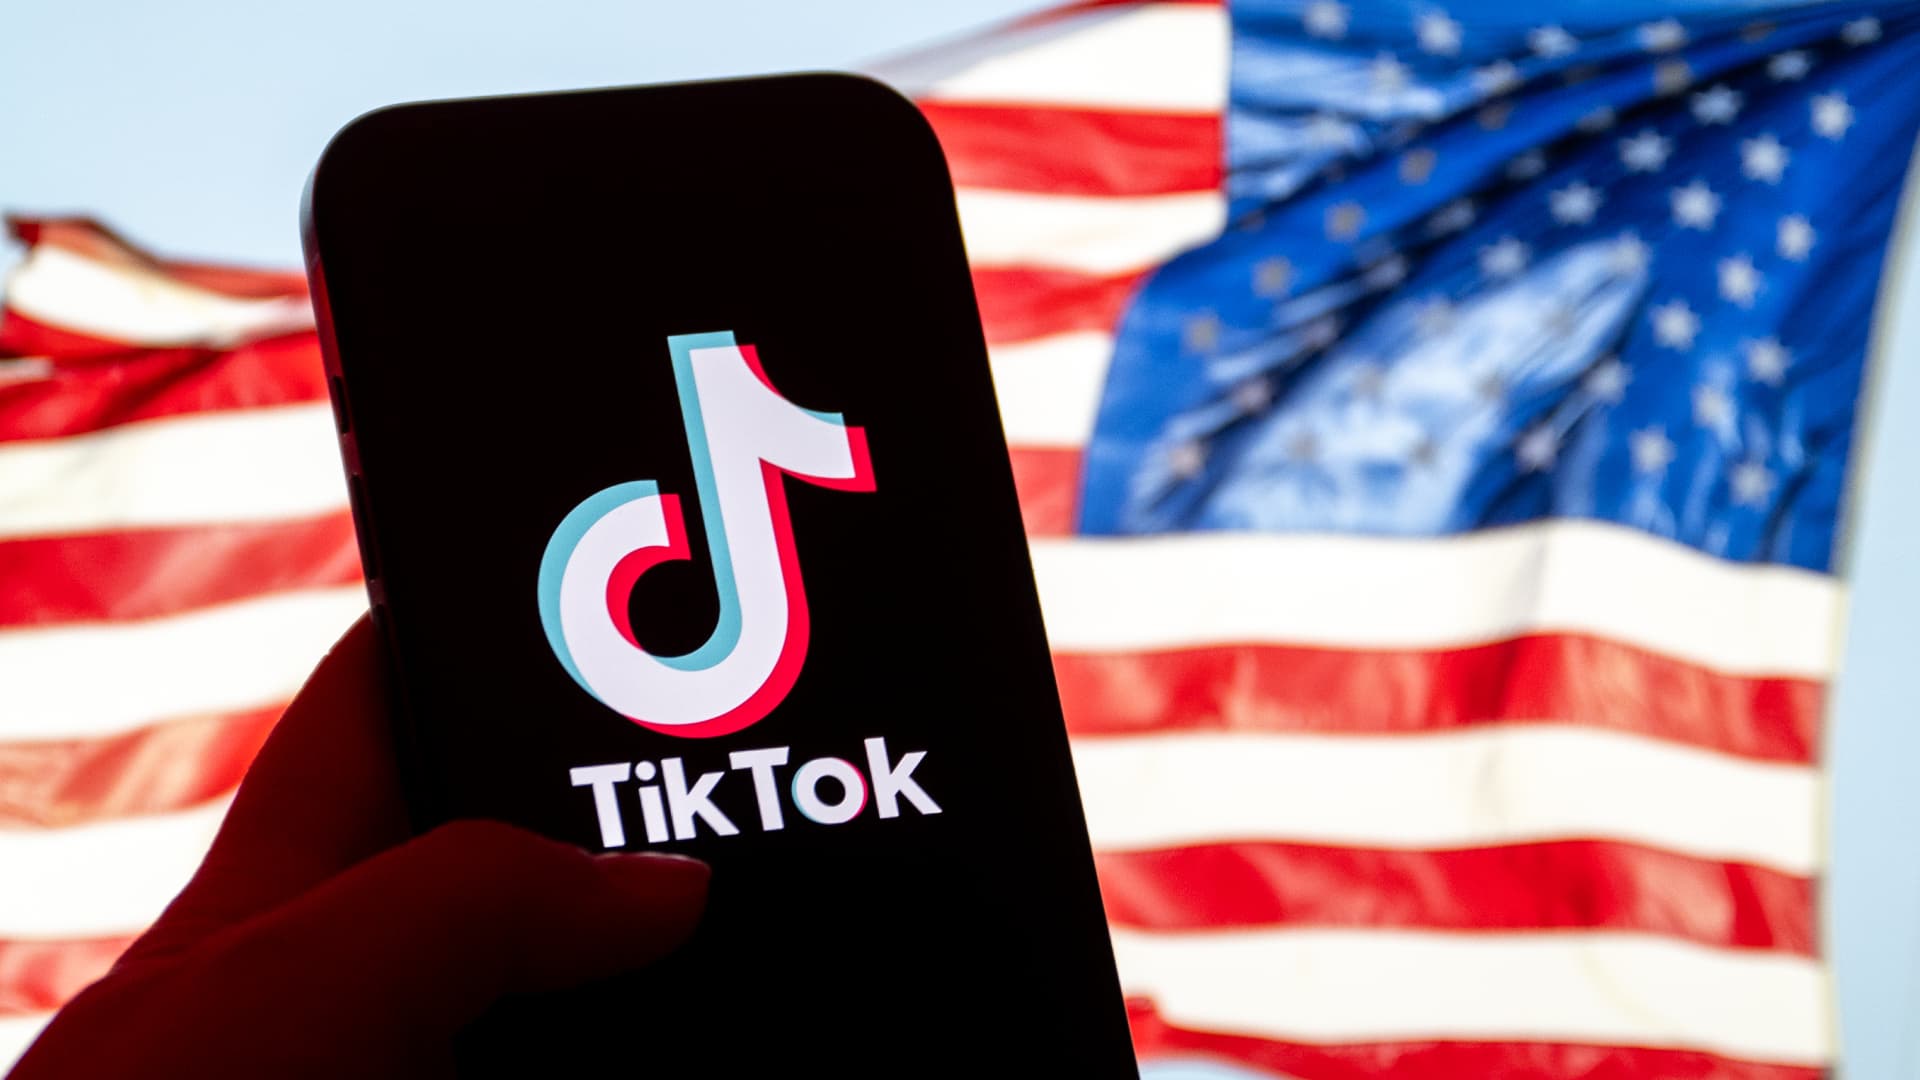 Close to half of Americans back a ban or sale of TikTok, CNBC survey found